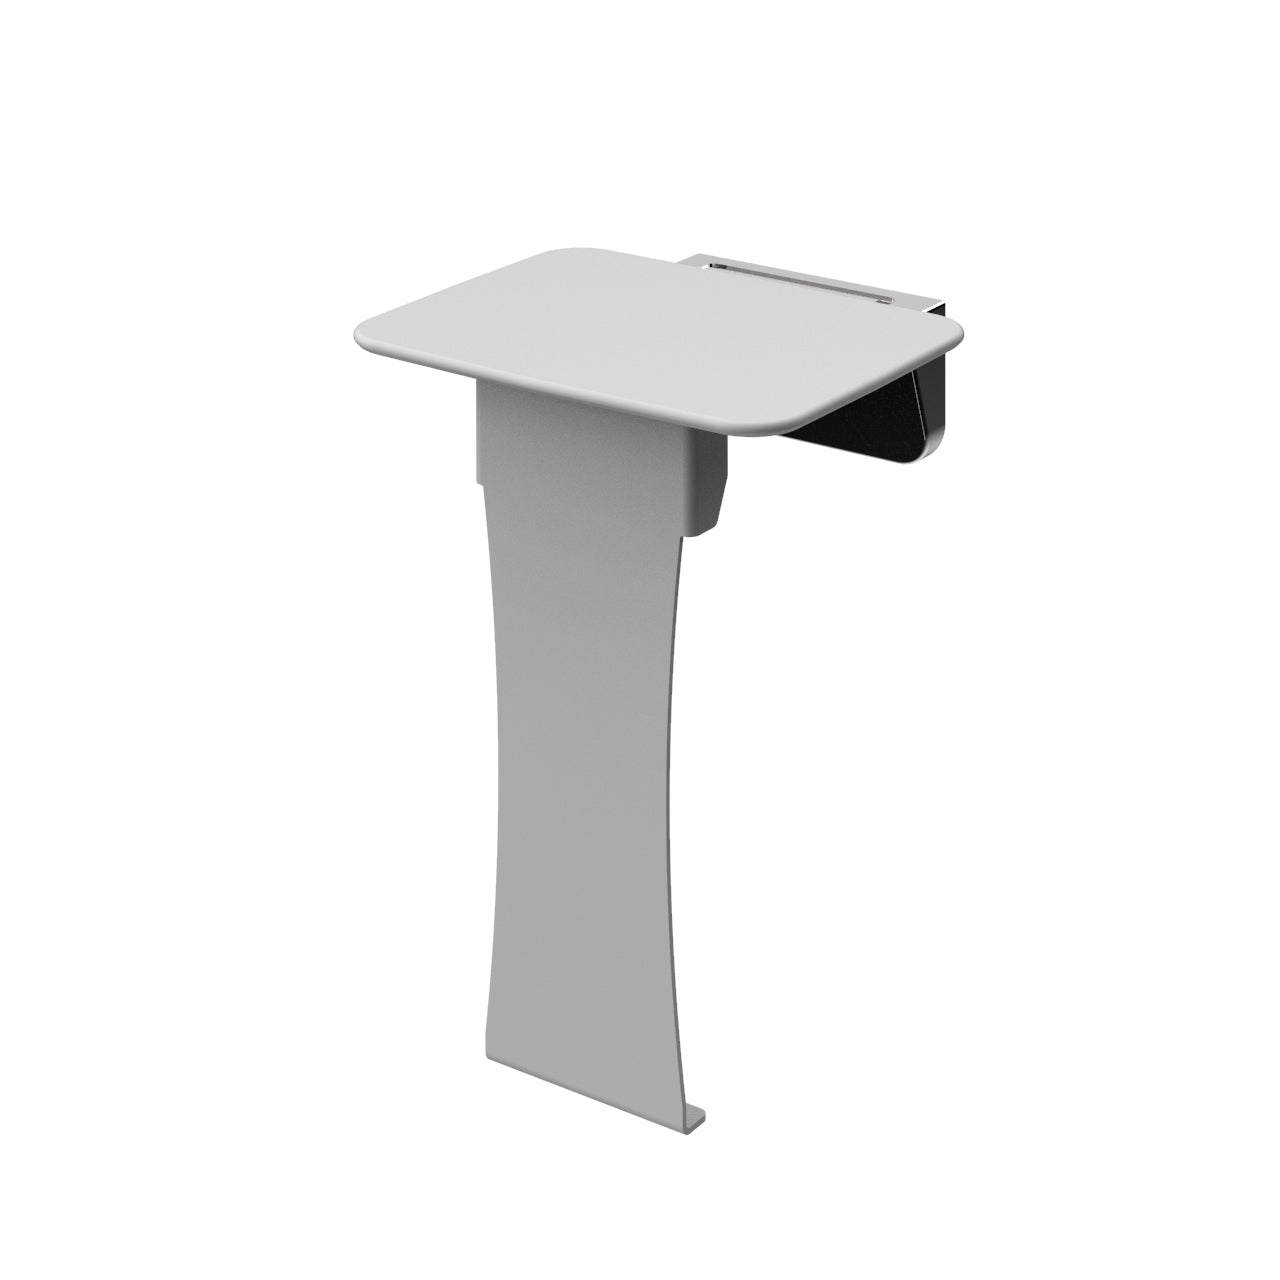 Liberty Shower Seat 350 Wide White With Fold Down Leg Chrome - S01ALWC